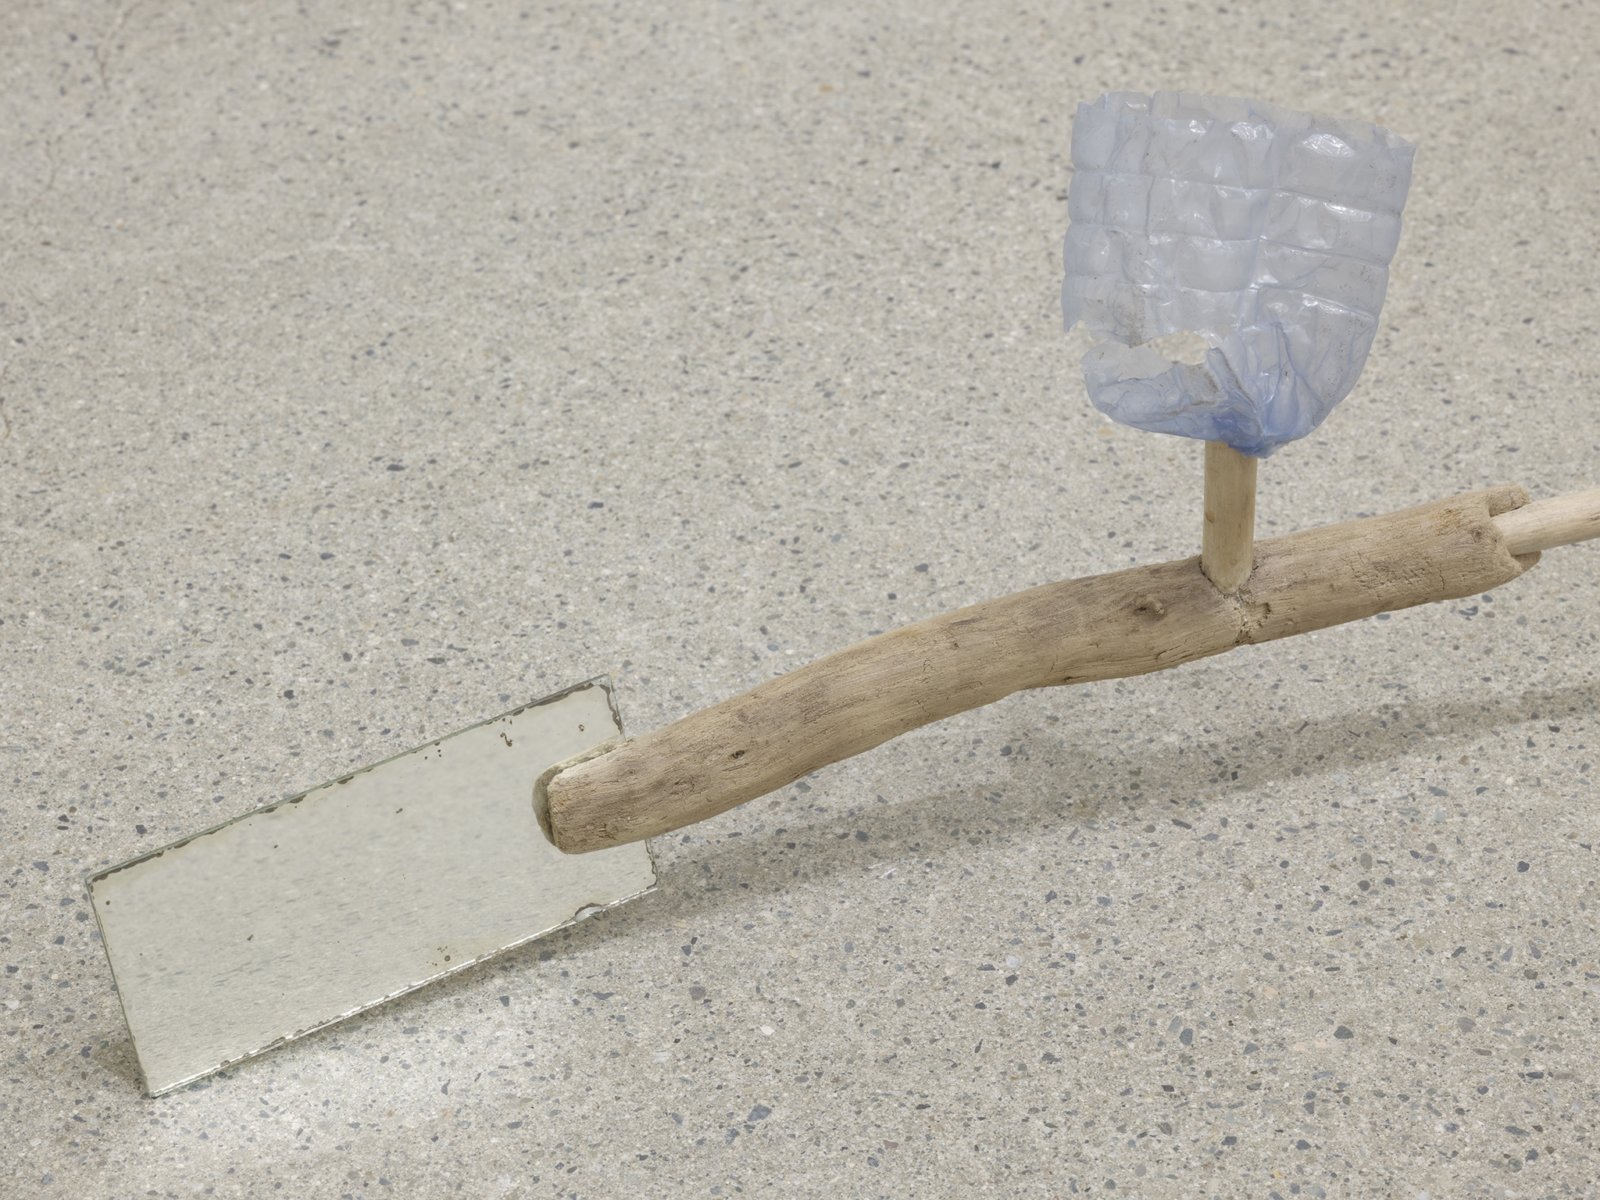 Ashes Withyman, Under a mouldy sky (spent tire, slab of stone, torn barbed wire fence) (detail), 2019, branches, margarine container base, penny, portion of water bottle, mirror, 7 x 26 x 4 in. (18 x 66 x 10 cm)